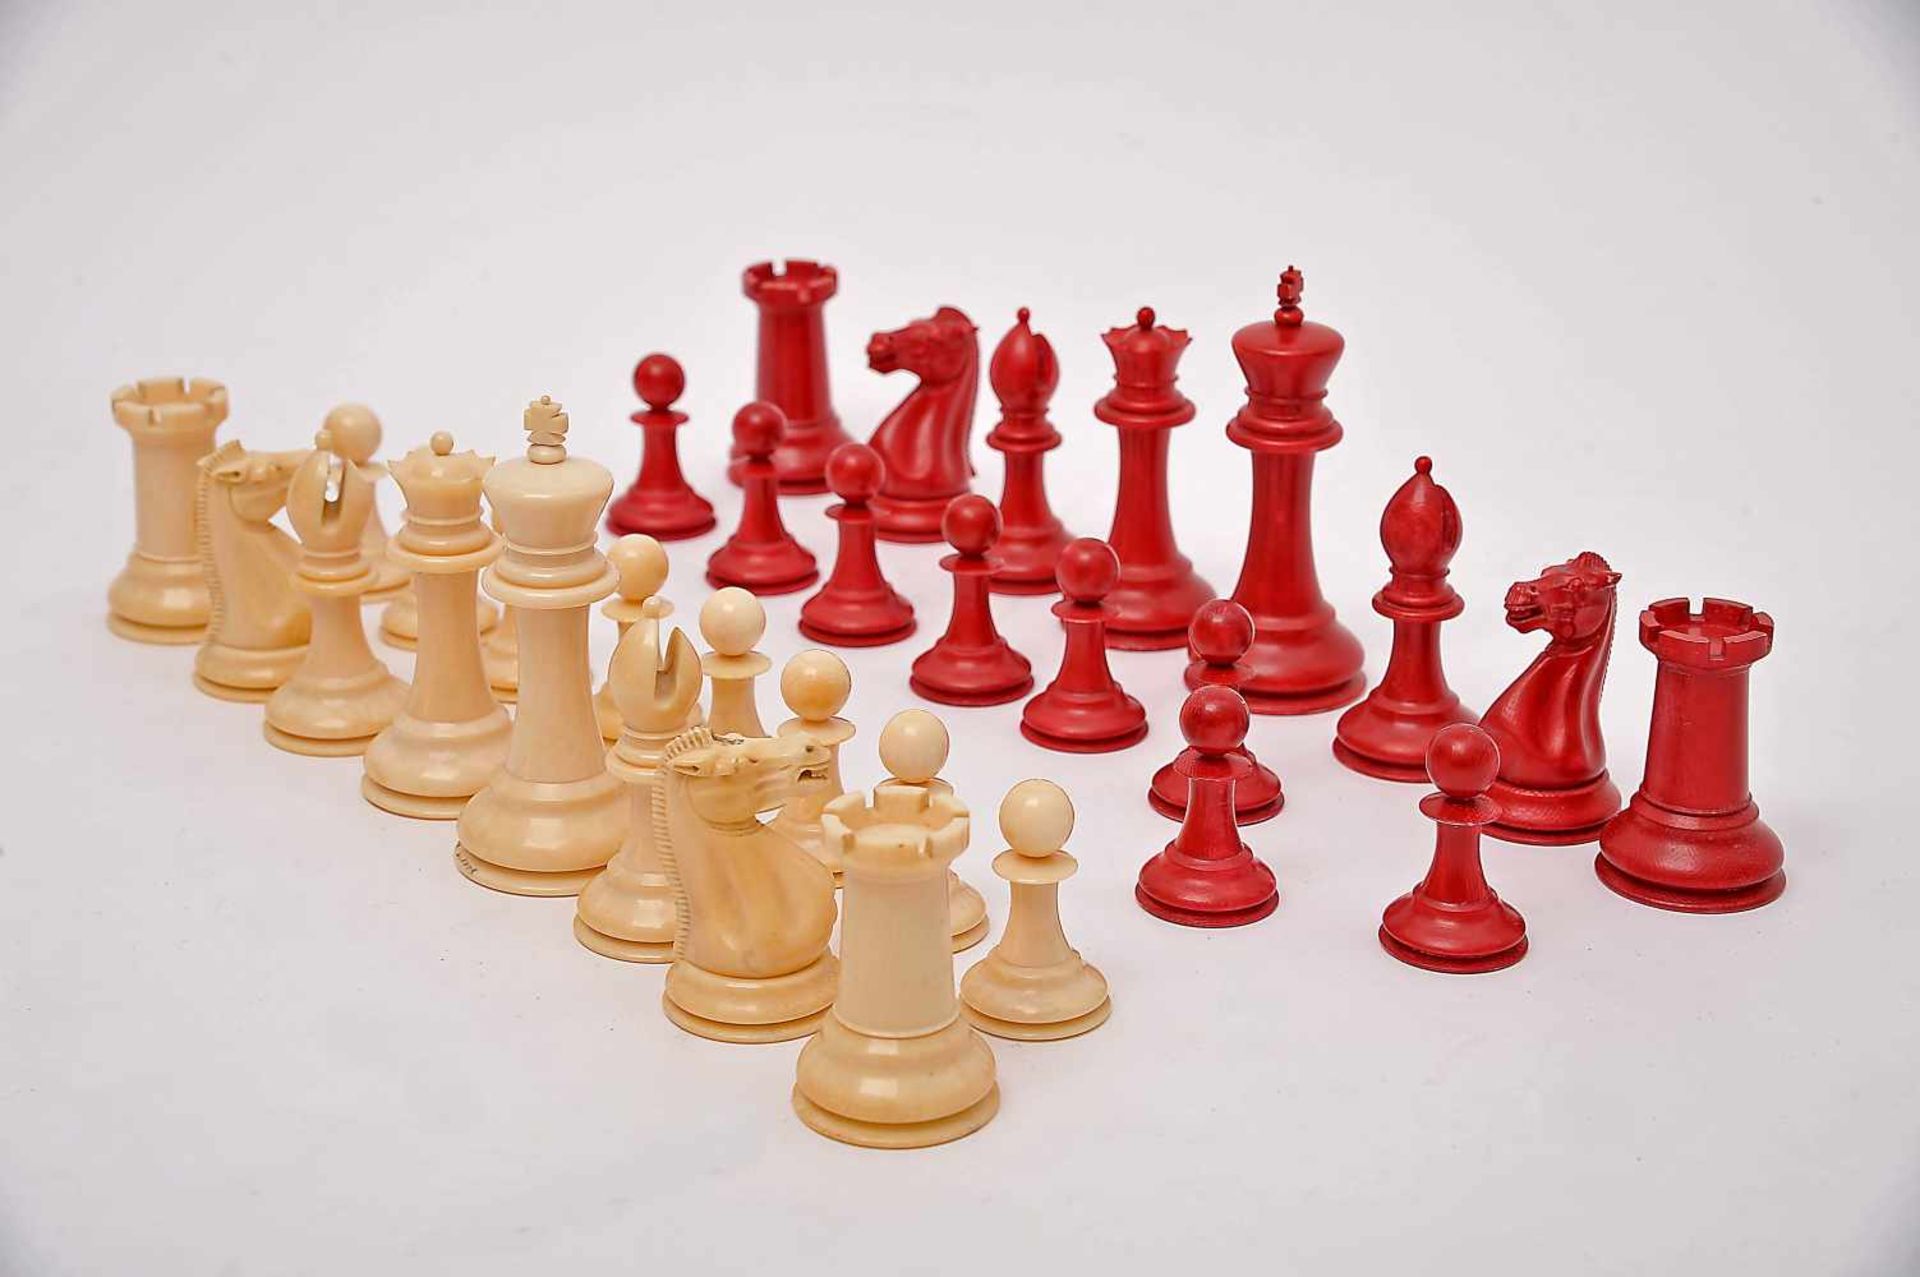 A JACQUES STAUNTON Chess Pieces - SIZE CLUB, carved ivory being one of the sets dyed red, mahogany